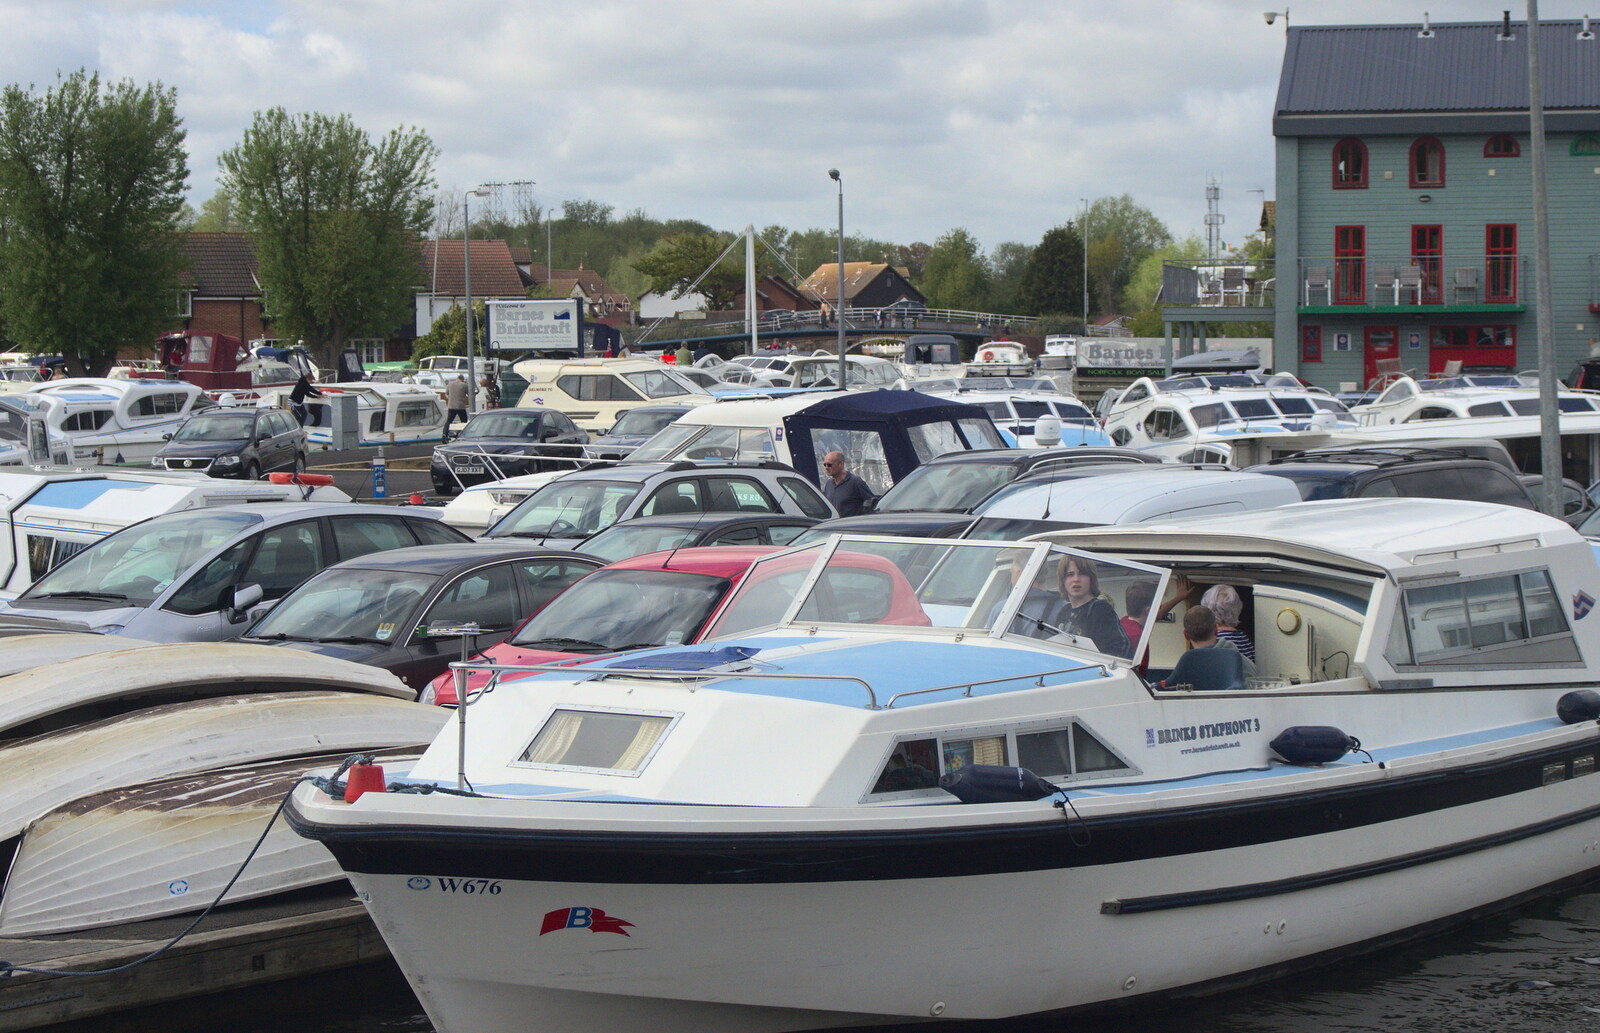 The marina is crowded from A Trip on the Norfolk Broads, Wroxham, Norfolk - 25th May 2013